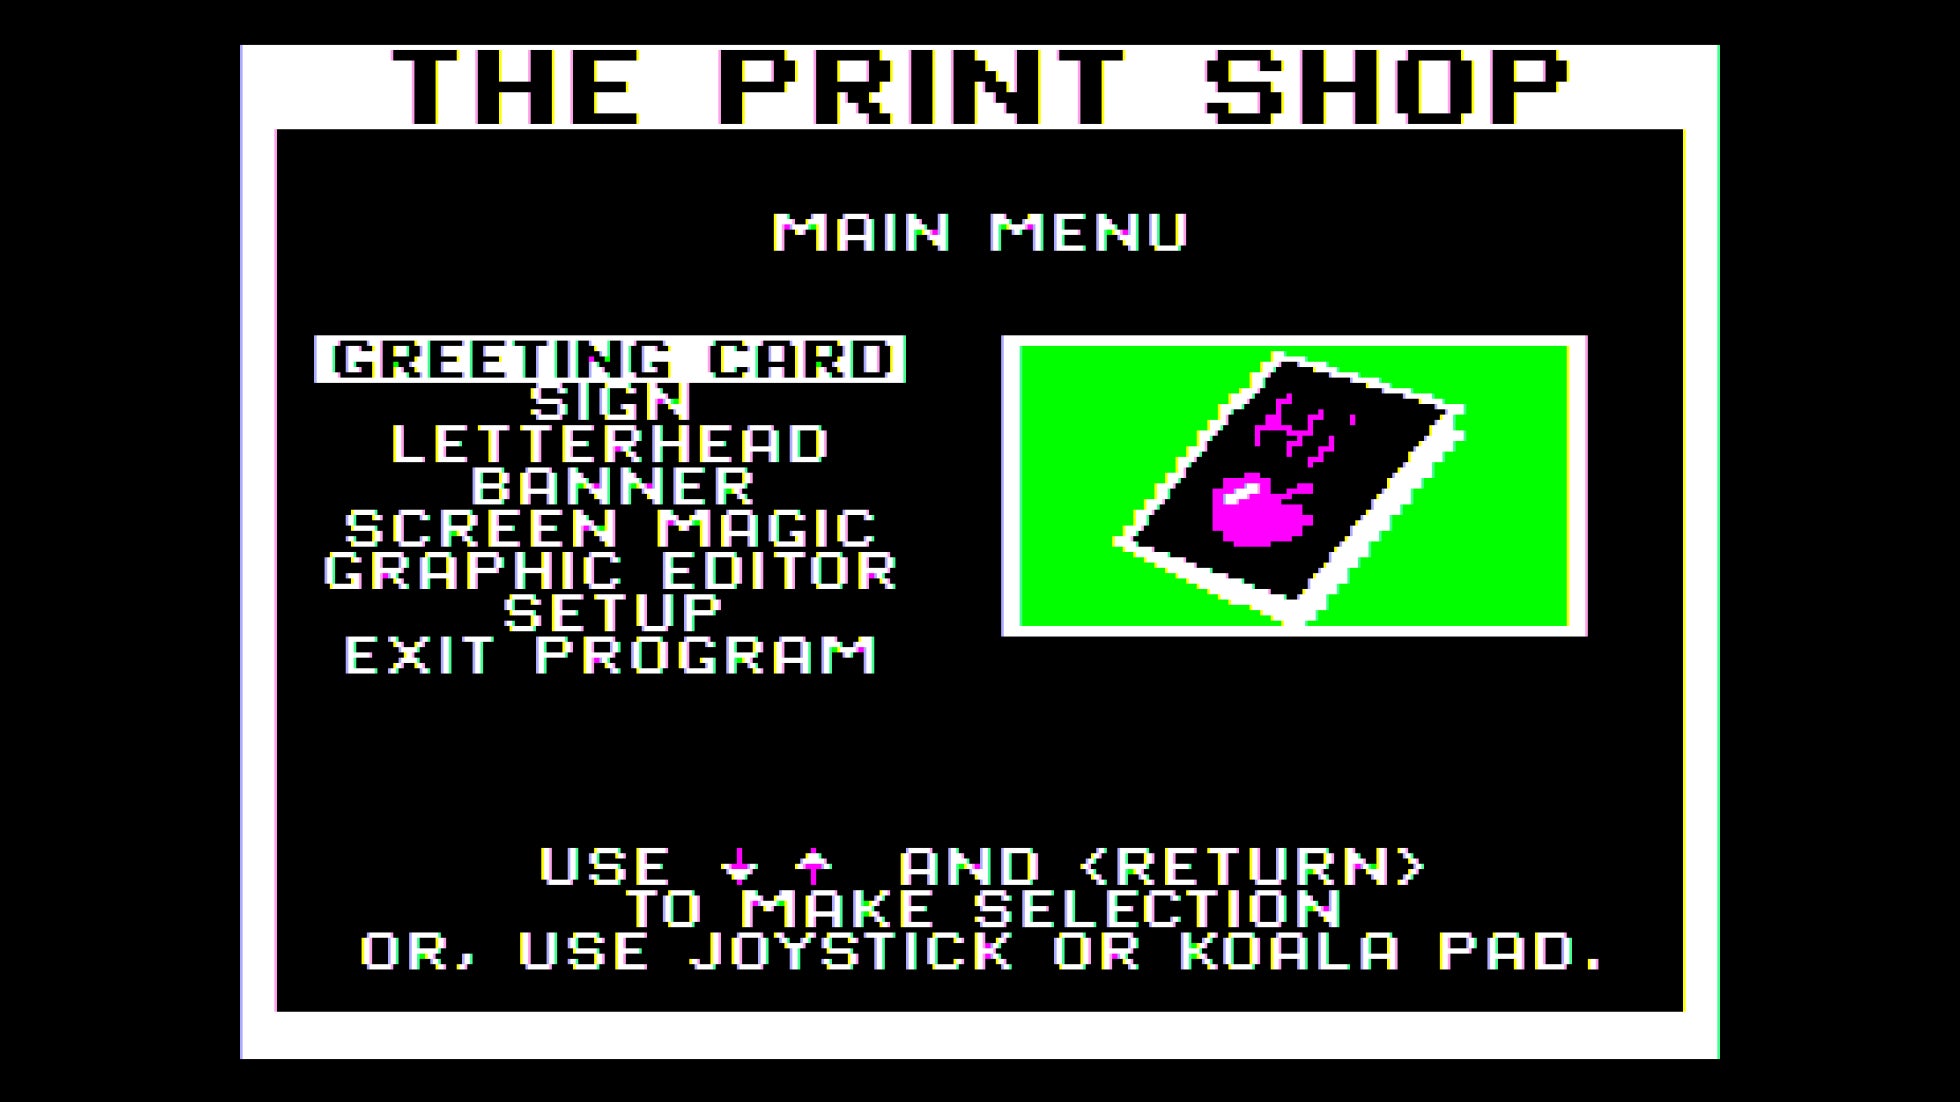 You Can Now Revisit the Most Popular Desktop Publishing App of the ’80s in Your Browser